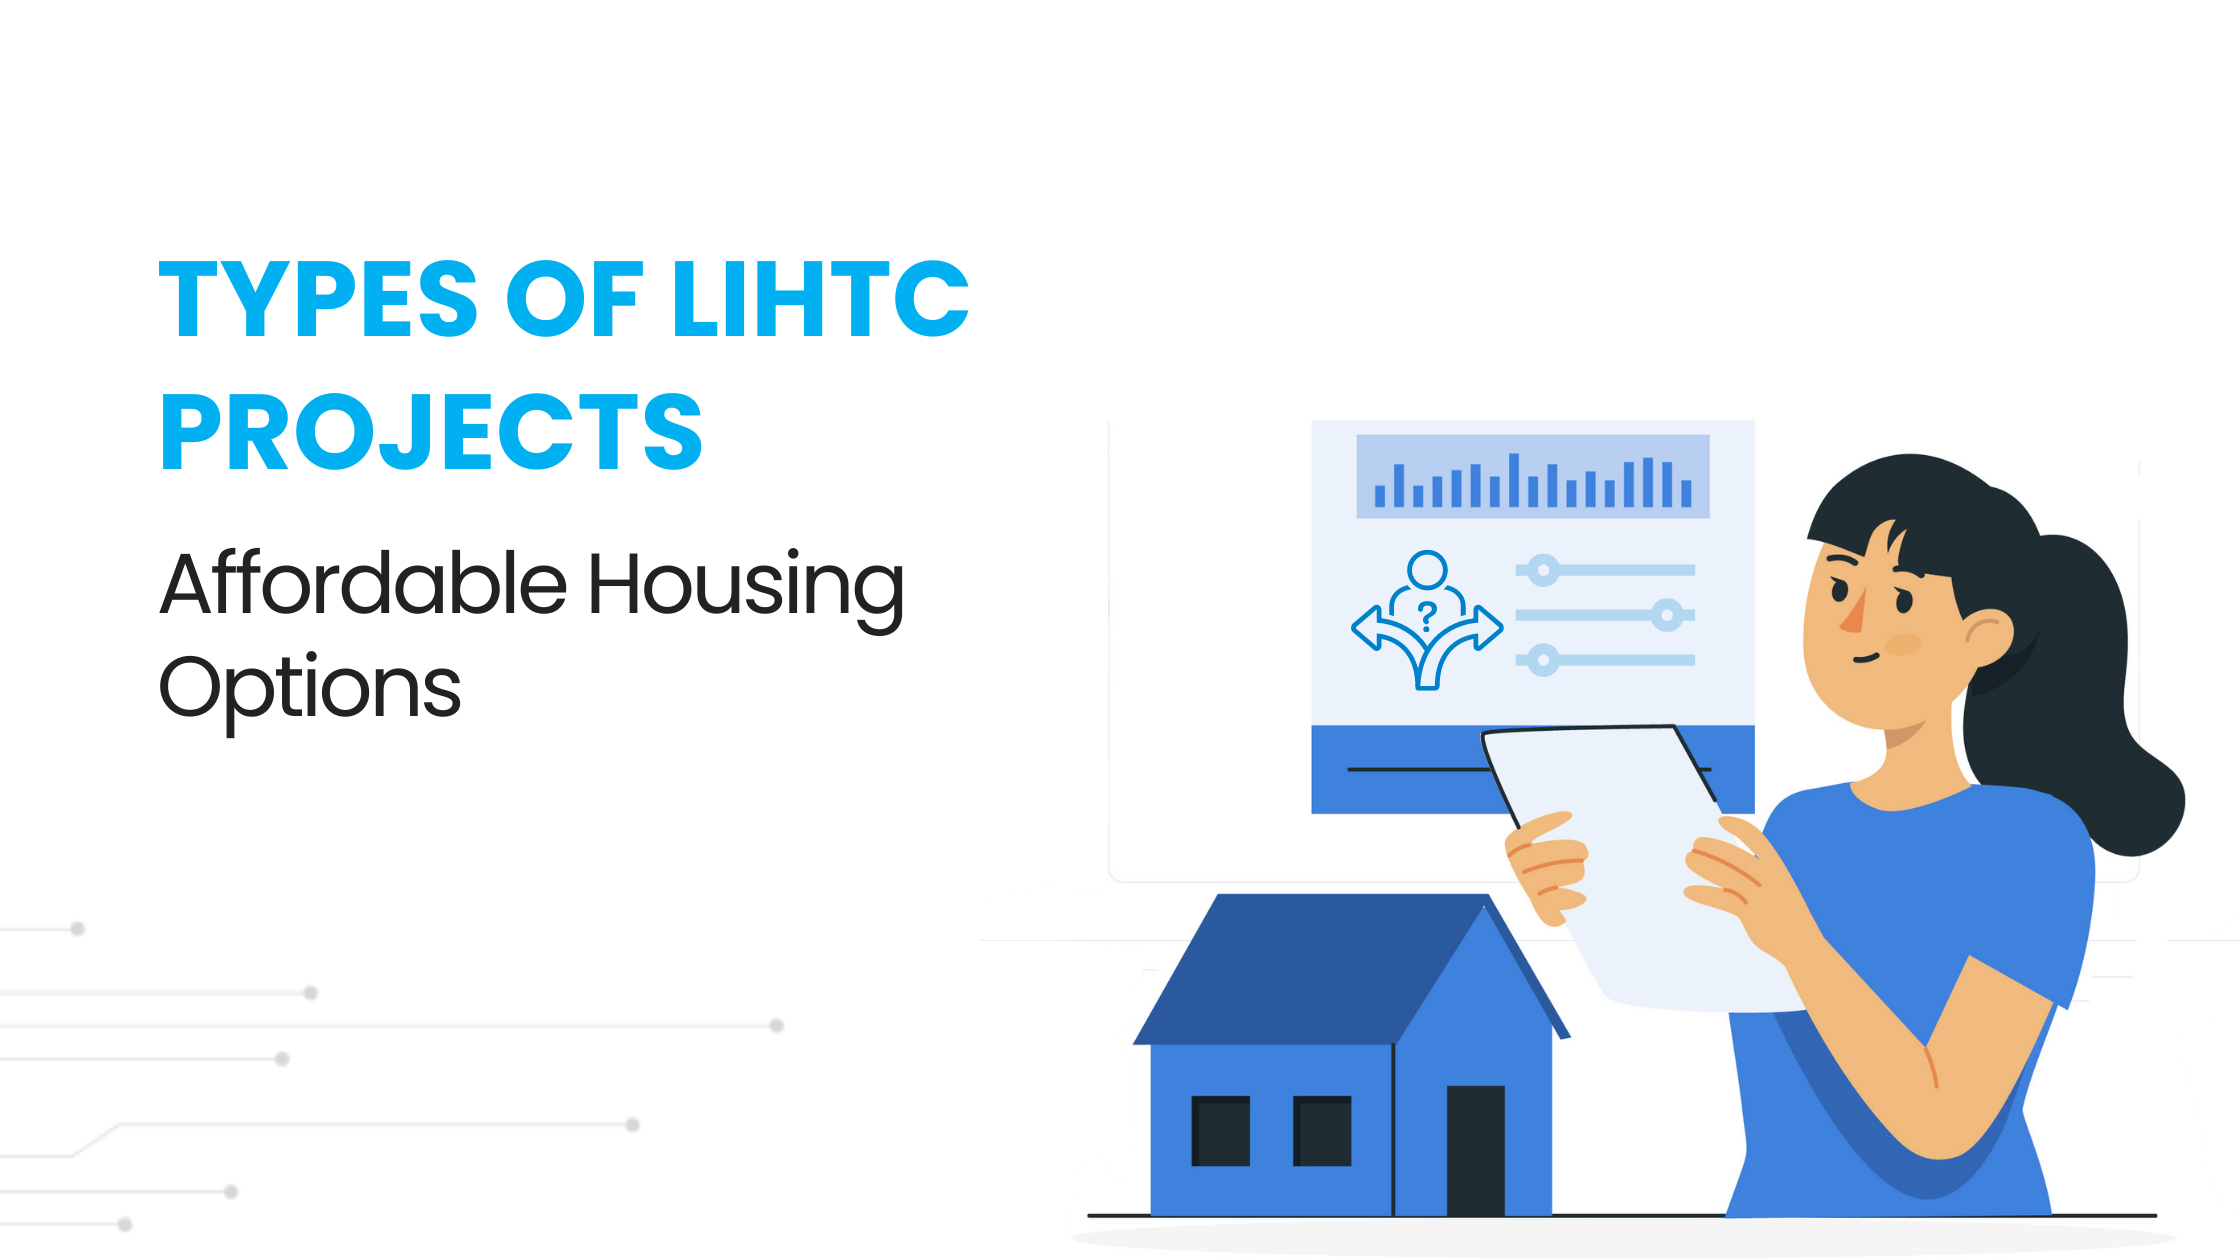 Types of LIHTC Projects and Affordable Housing Options